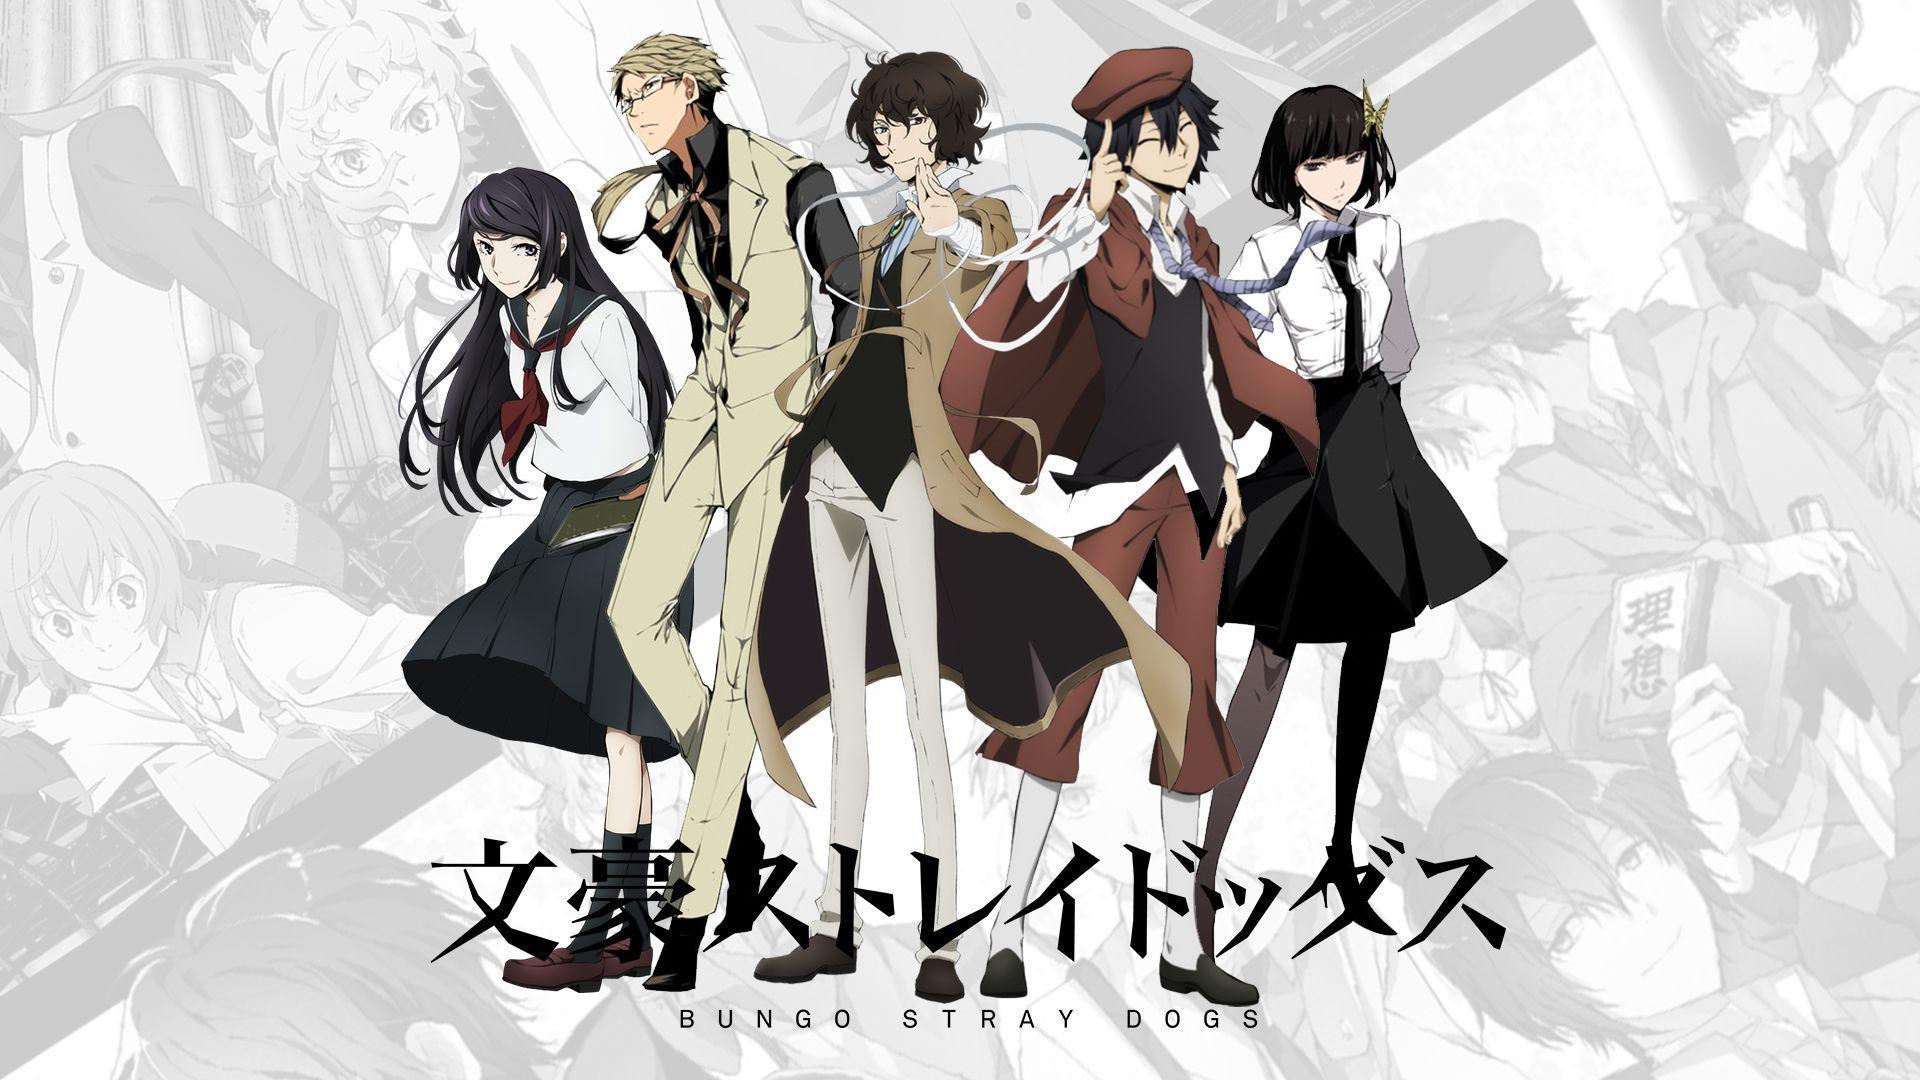 Anime Bungou Stray Dogs Full HD Wallpaper. Bungo Stray Dogs